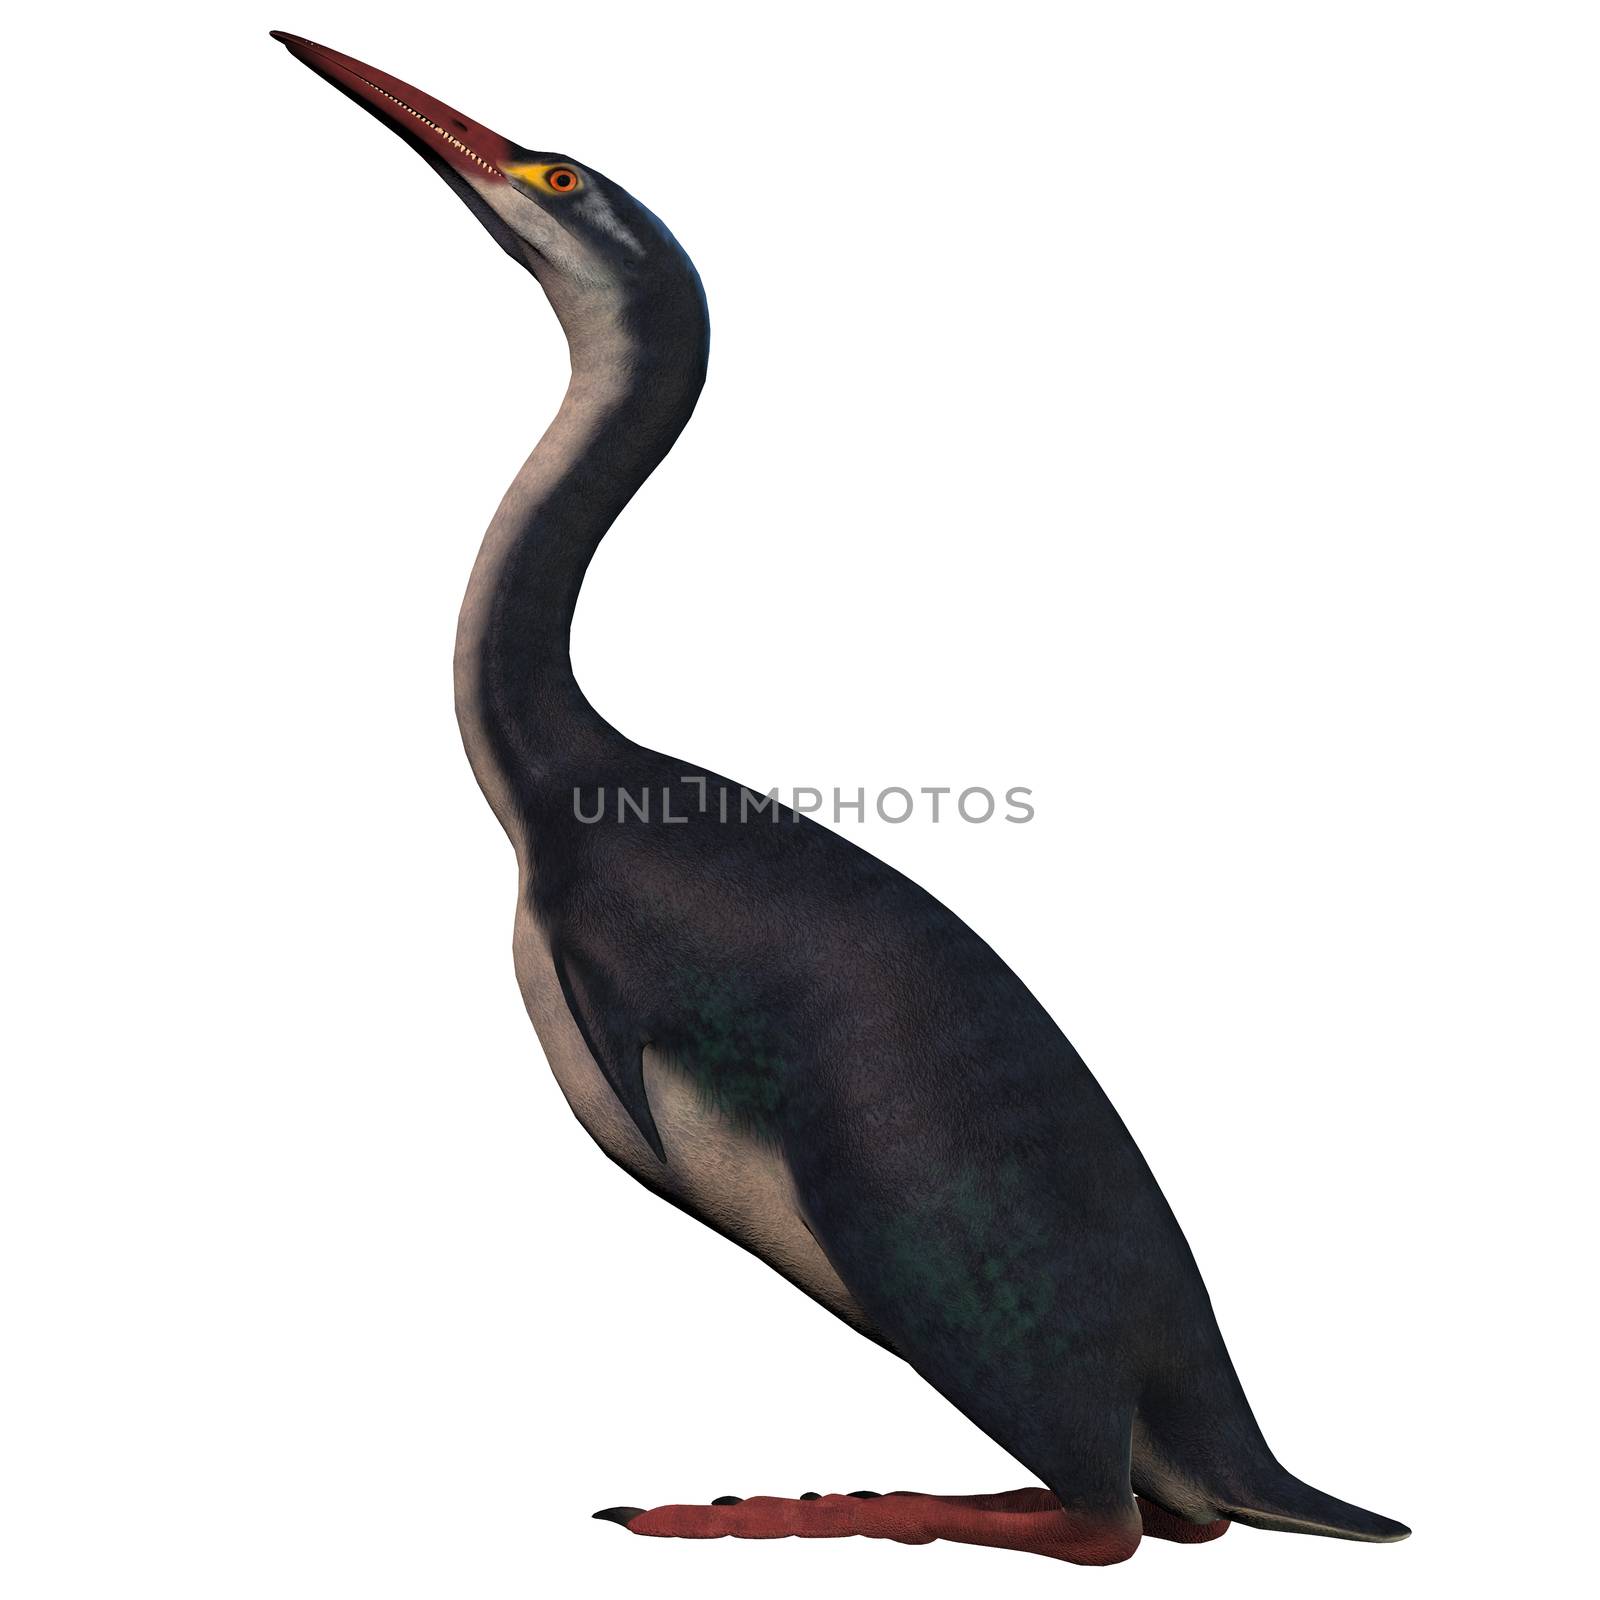 Hesperornis was a flightless waterbird that inhabited the lakes and marsh ponds of the Cretaceous Era.